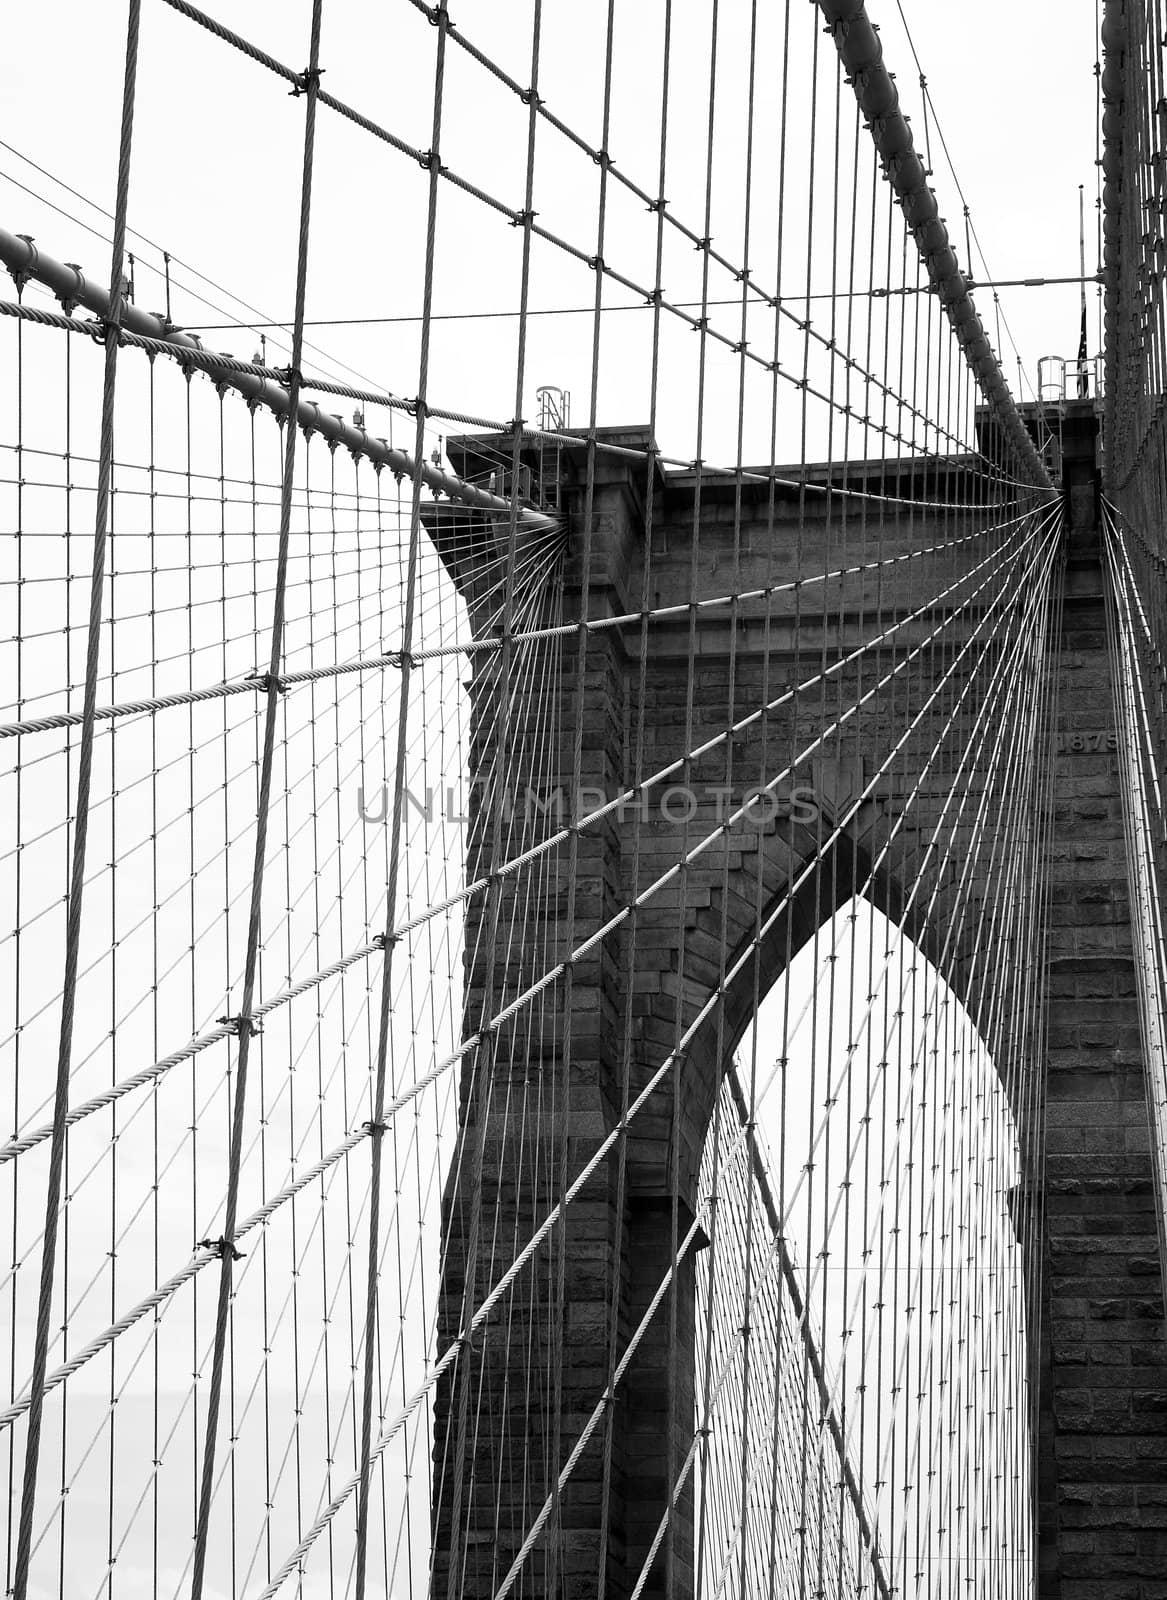 The Brooklyn Bridge is one of the oldest suspension bridges in the United States and connects Manhattan and Brooklyn.